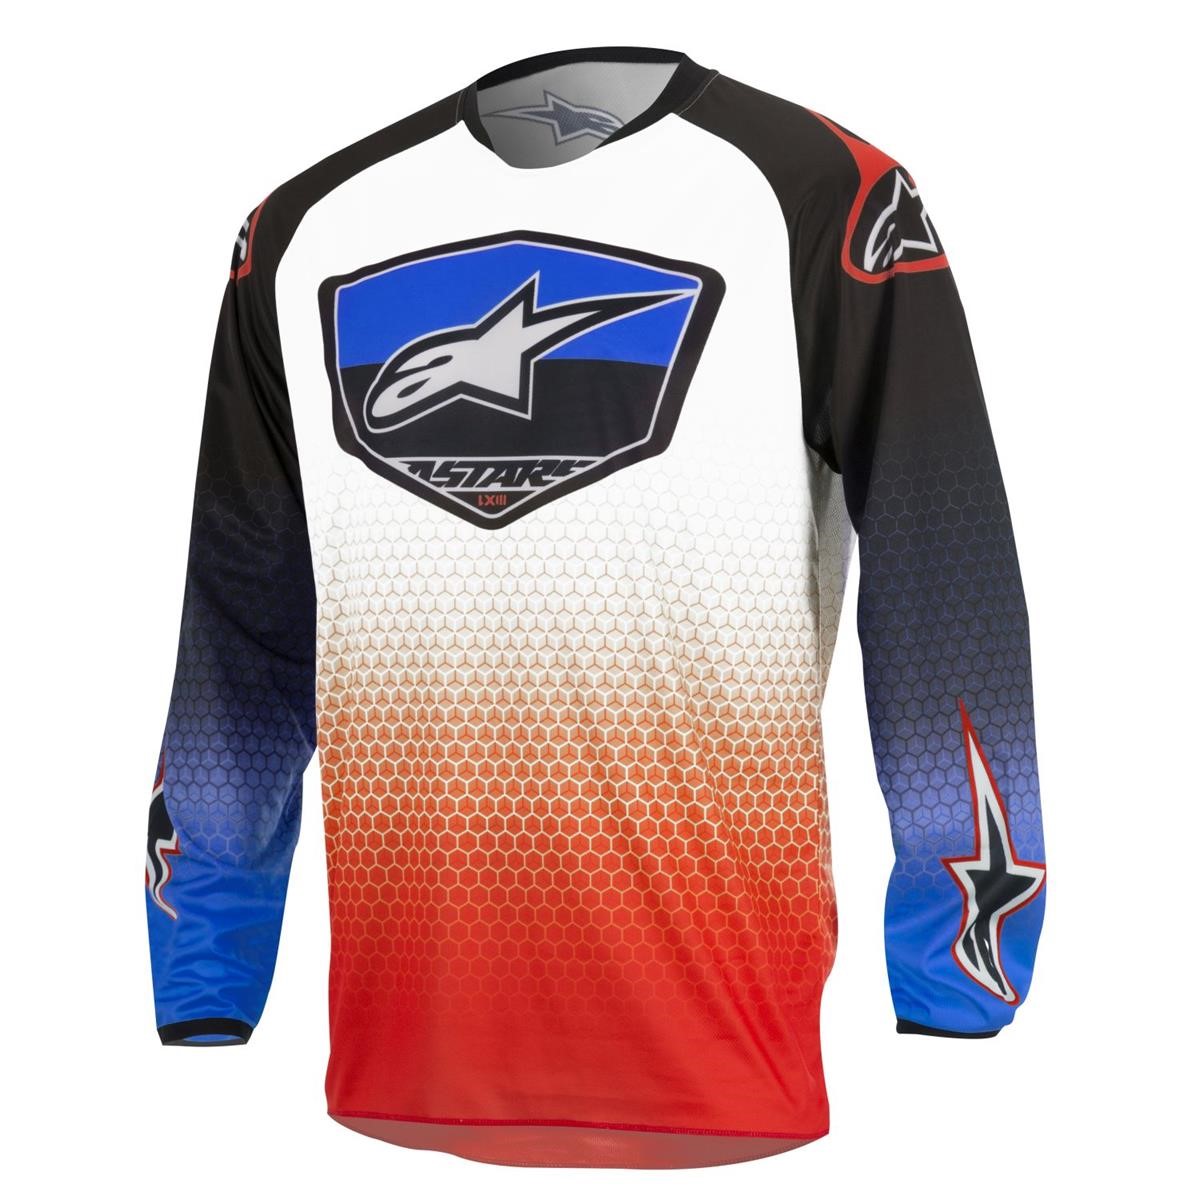 Alpinestars Jersey Racer Supermatic Red/Blue/White